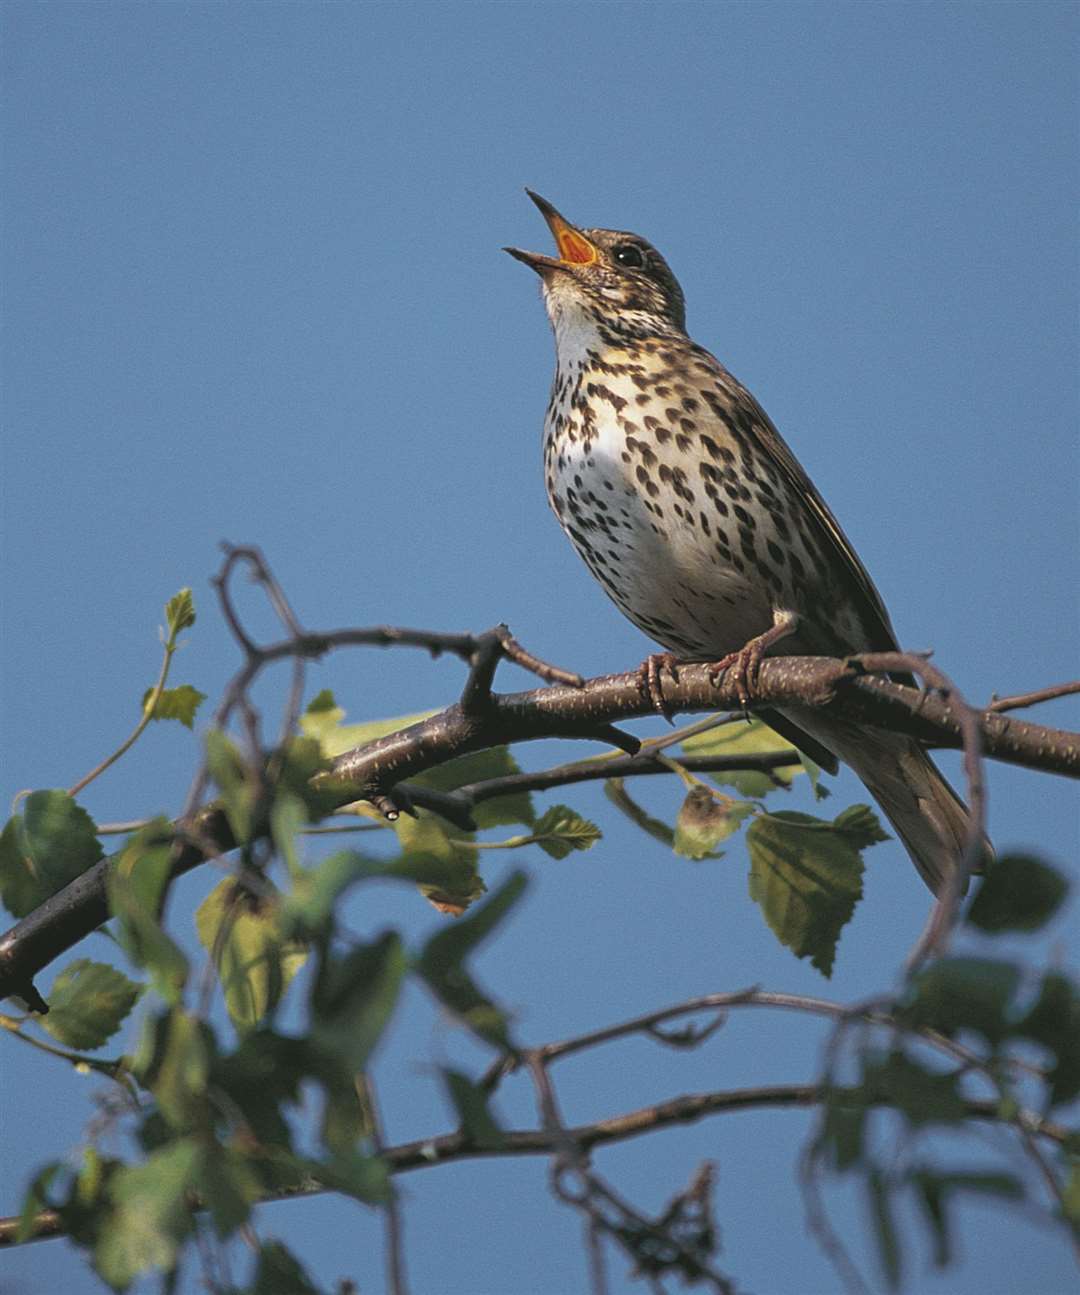 A song thrush came in 20th in the survey in Kent